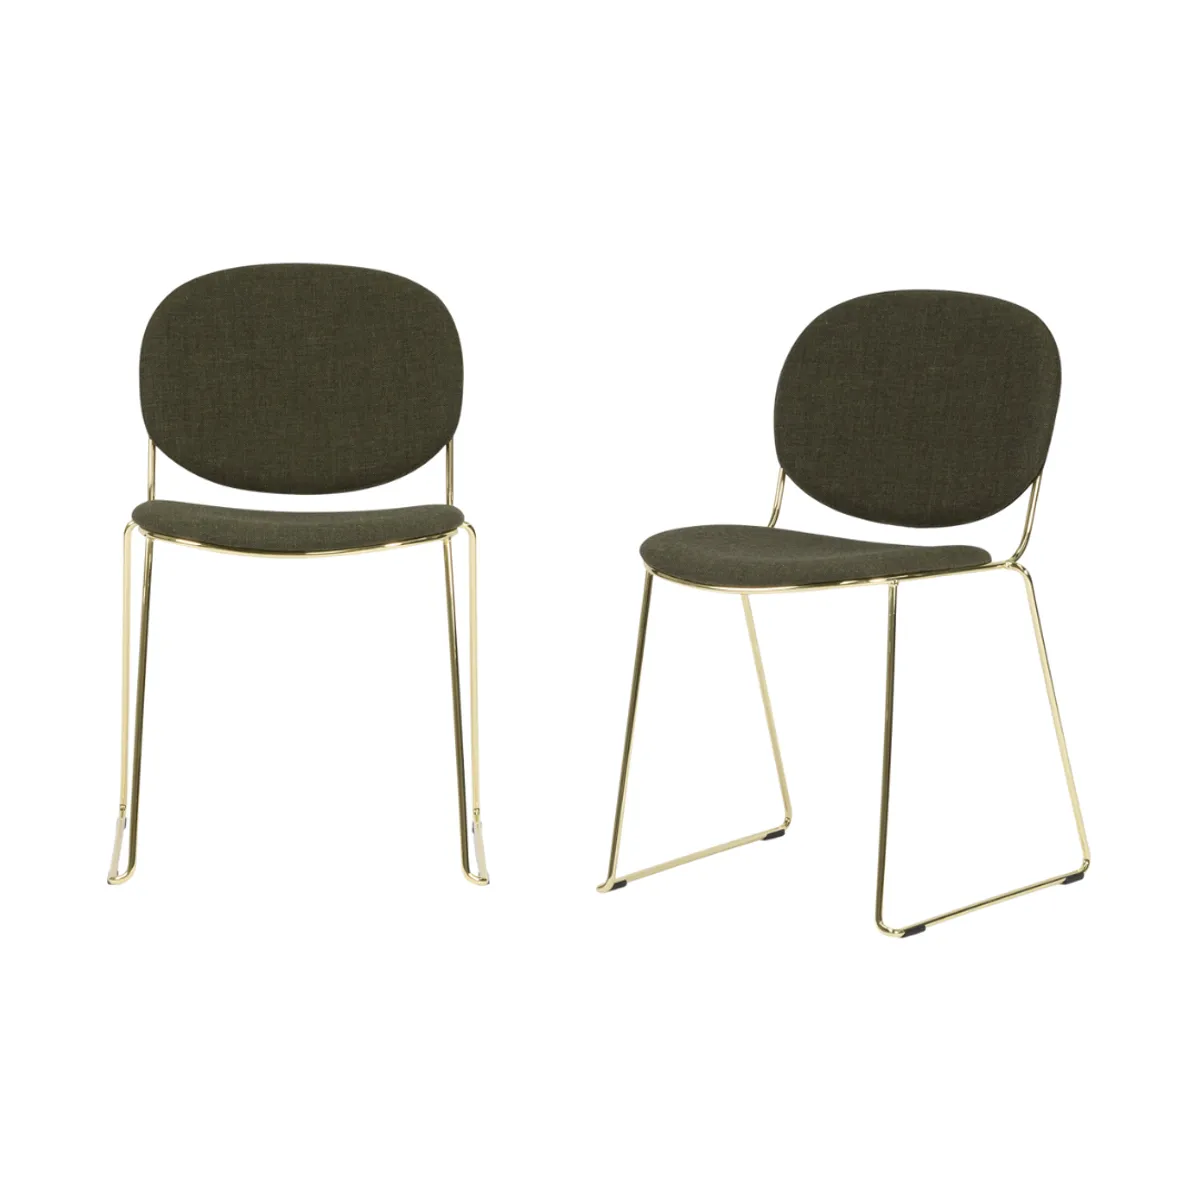 Timo stacking chair 2